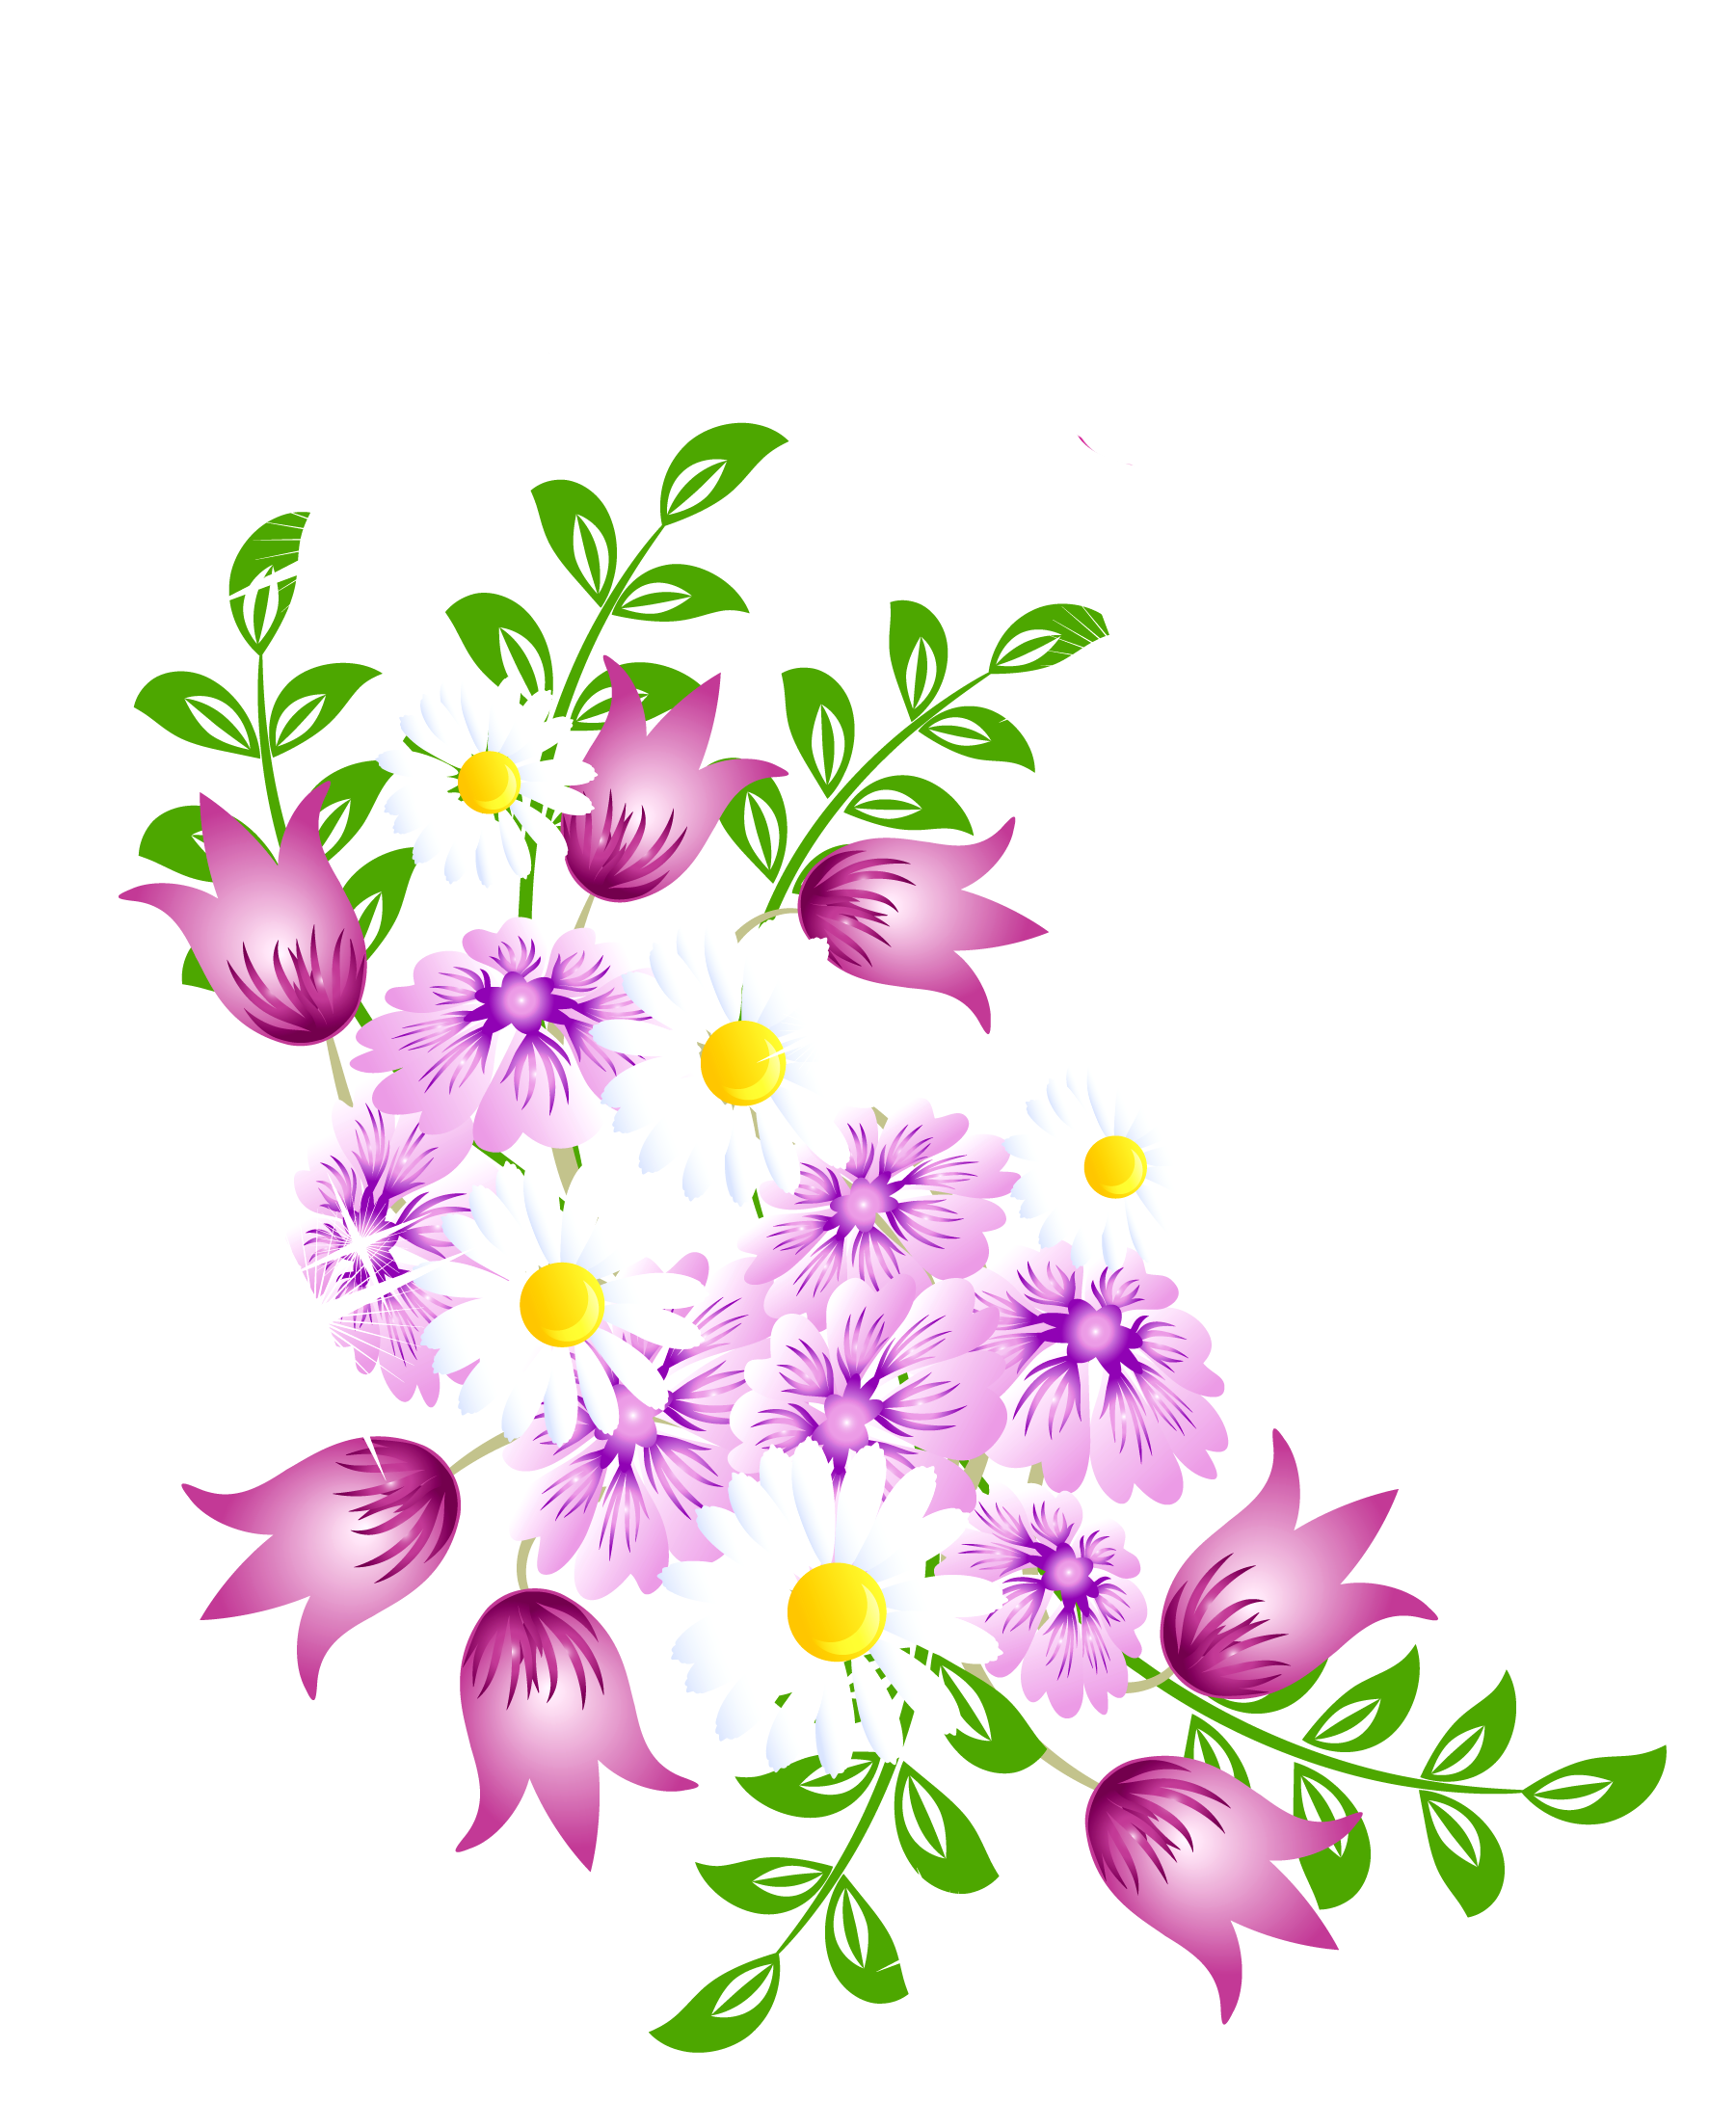 flowers clipart watercolor